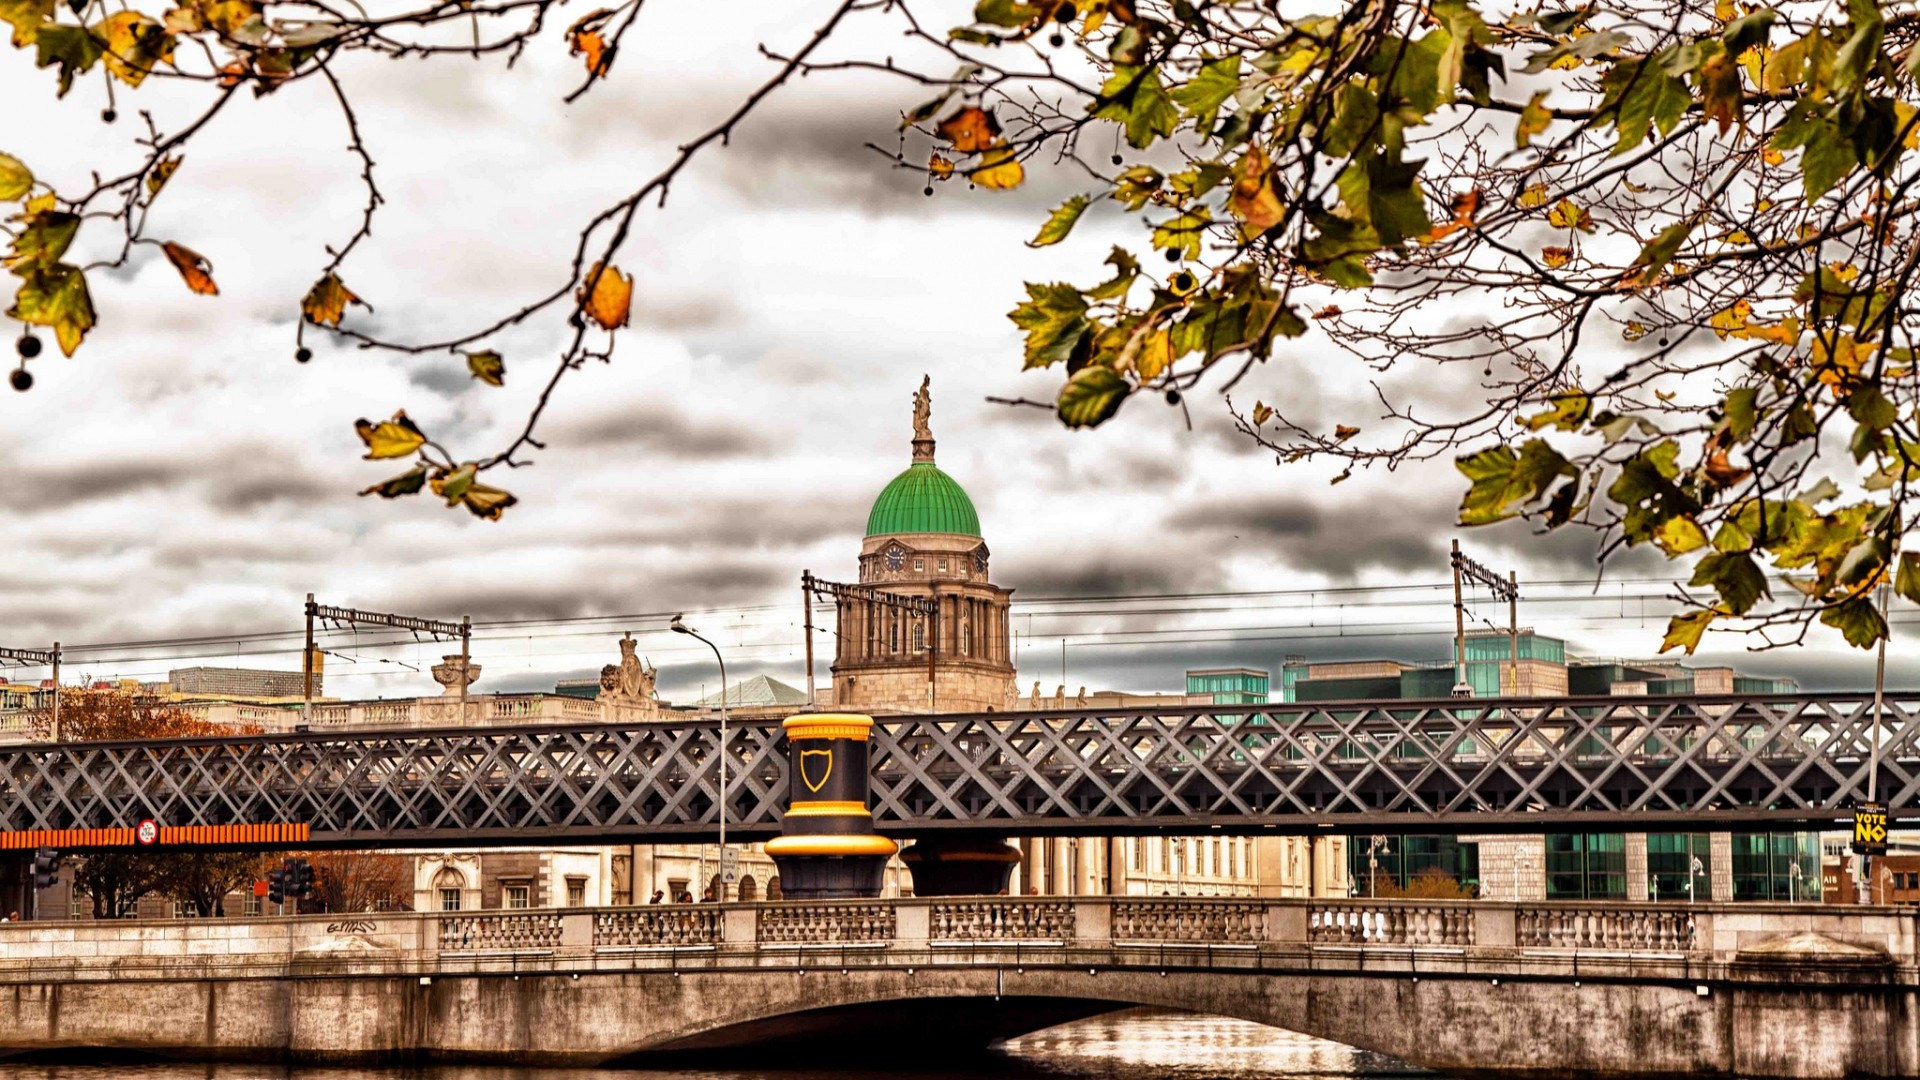 General 1920x1080 architecture cityscape city capital building street Dublin Ireland bridge cathedral trees leaves clouds HDR river